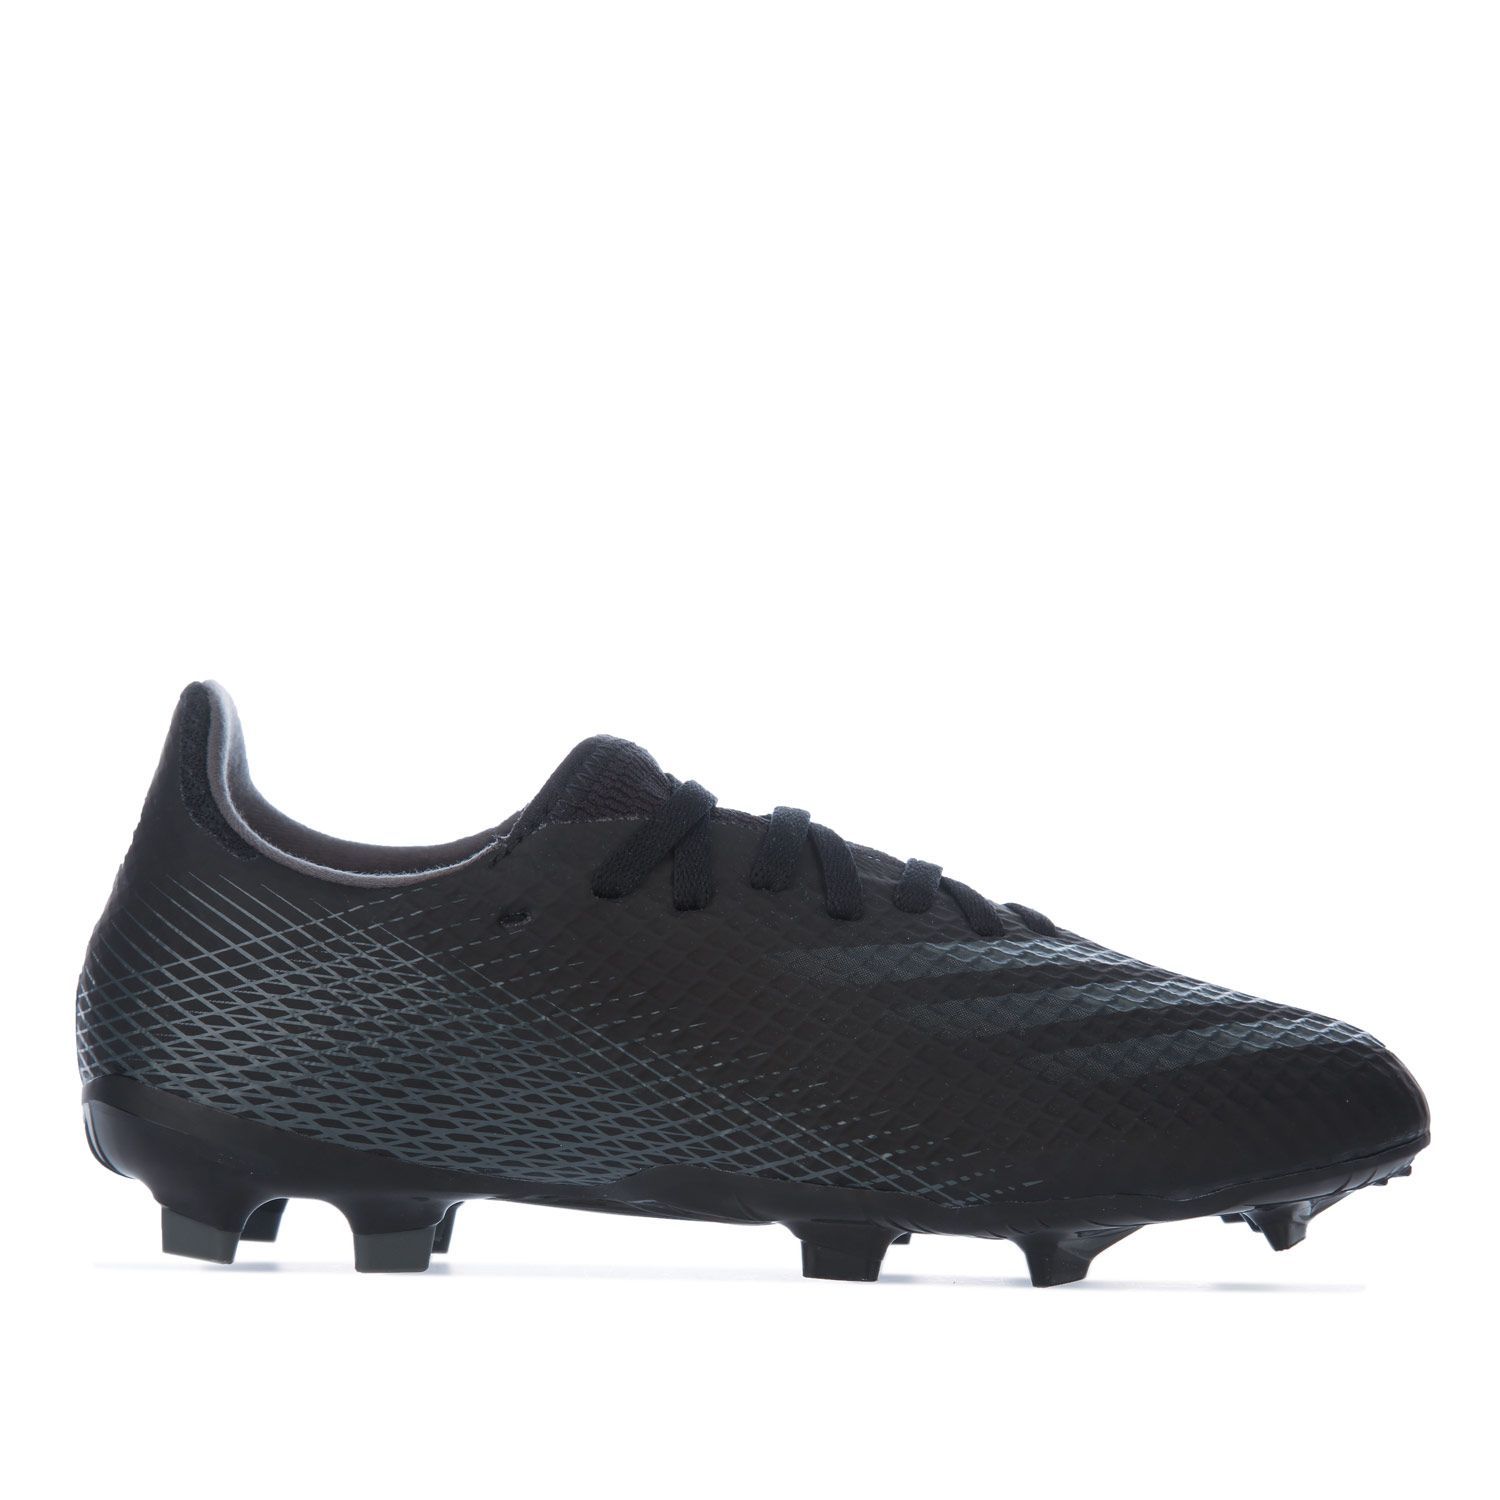 Junior Boys adidas X Ghosted.3 FG Football Boots in black.- Engineered mesh upper.- Lace fastening.- Four- way stretch material.- Stretchy tongue.- Firm ground.- 3 stripe detail to side.- TPU firm ground outsole.- Textile and synthetic lining  Synthetic sole.- Ref.: FW3545J